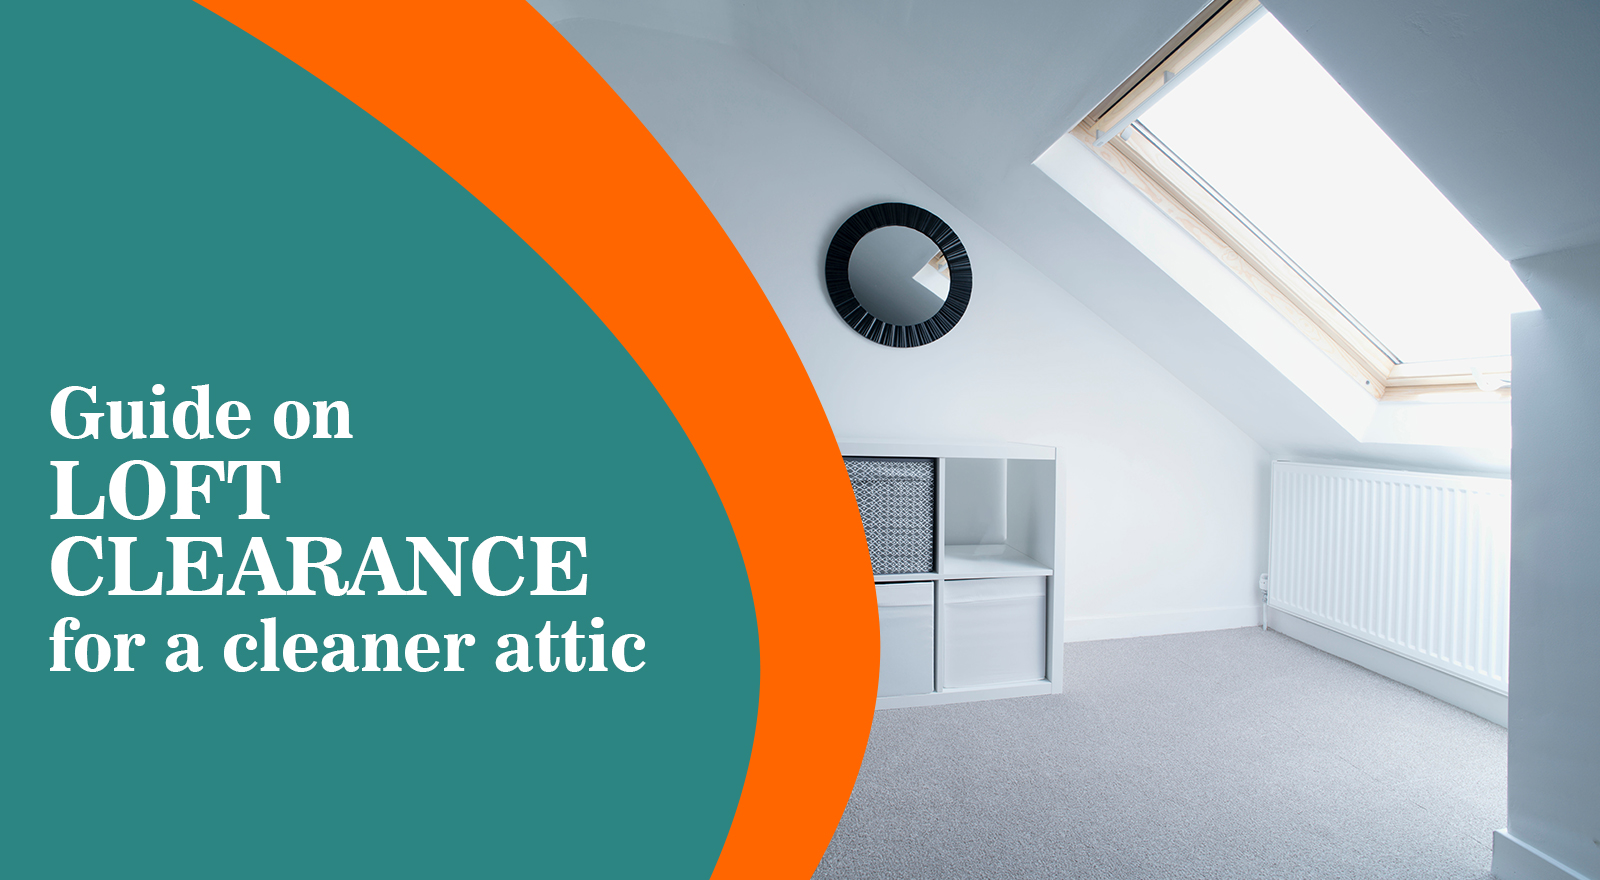 Guide on loft clearance for a cleaner attic